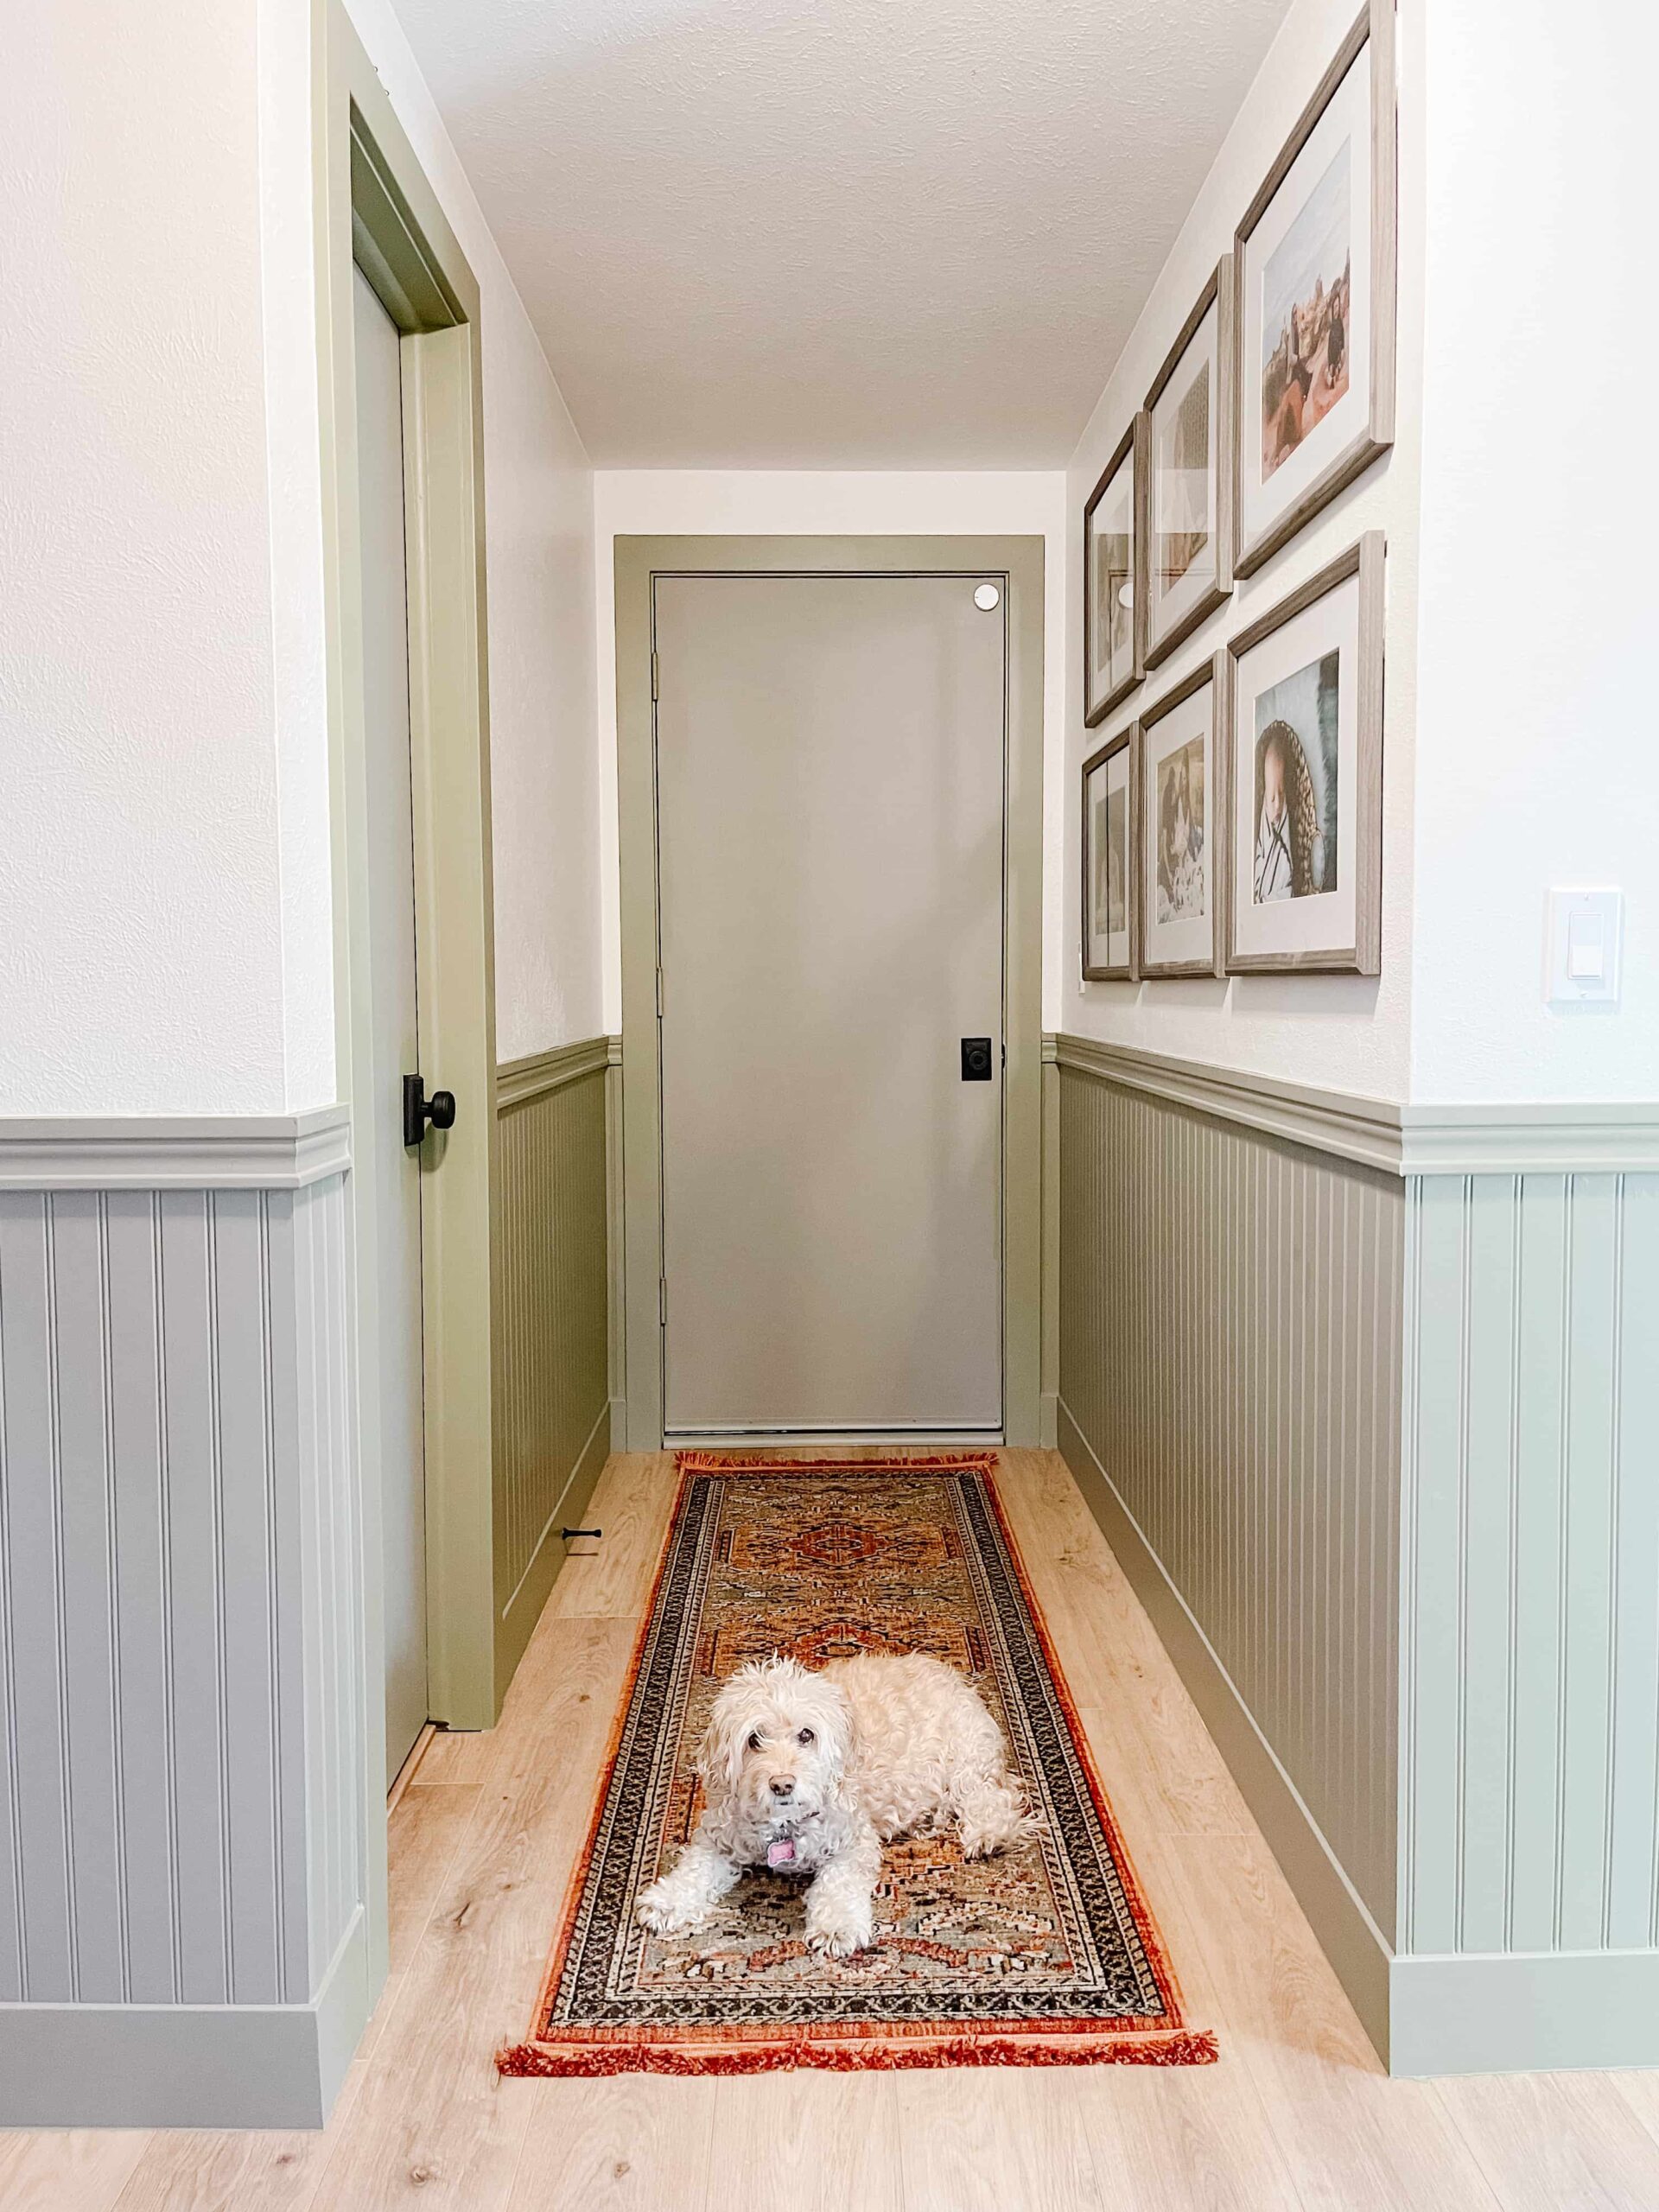 How to Install Beadboard Wainscoting - This Old House